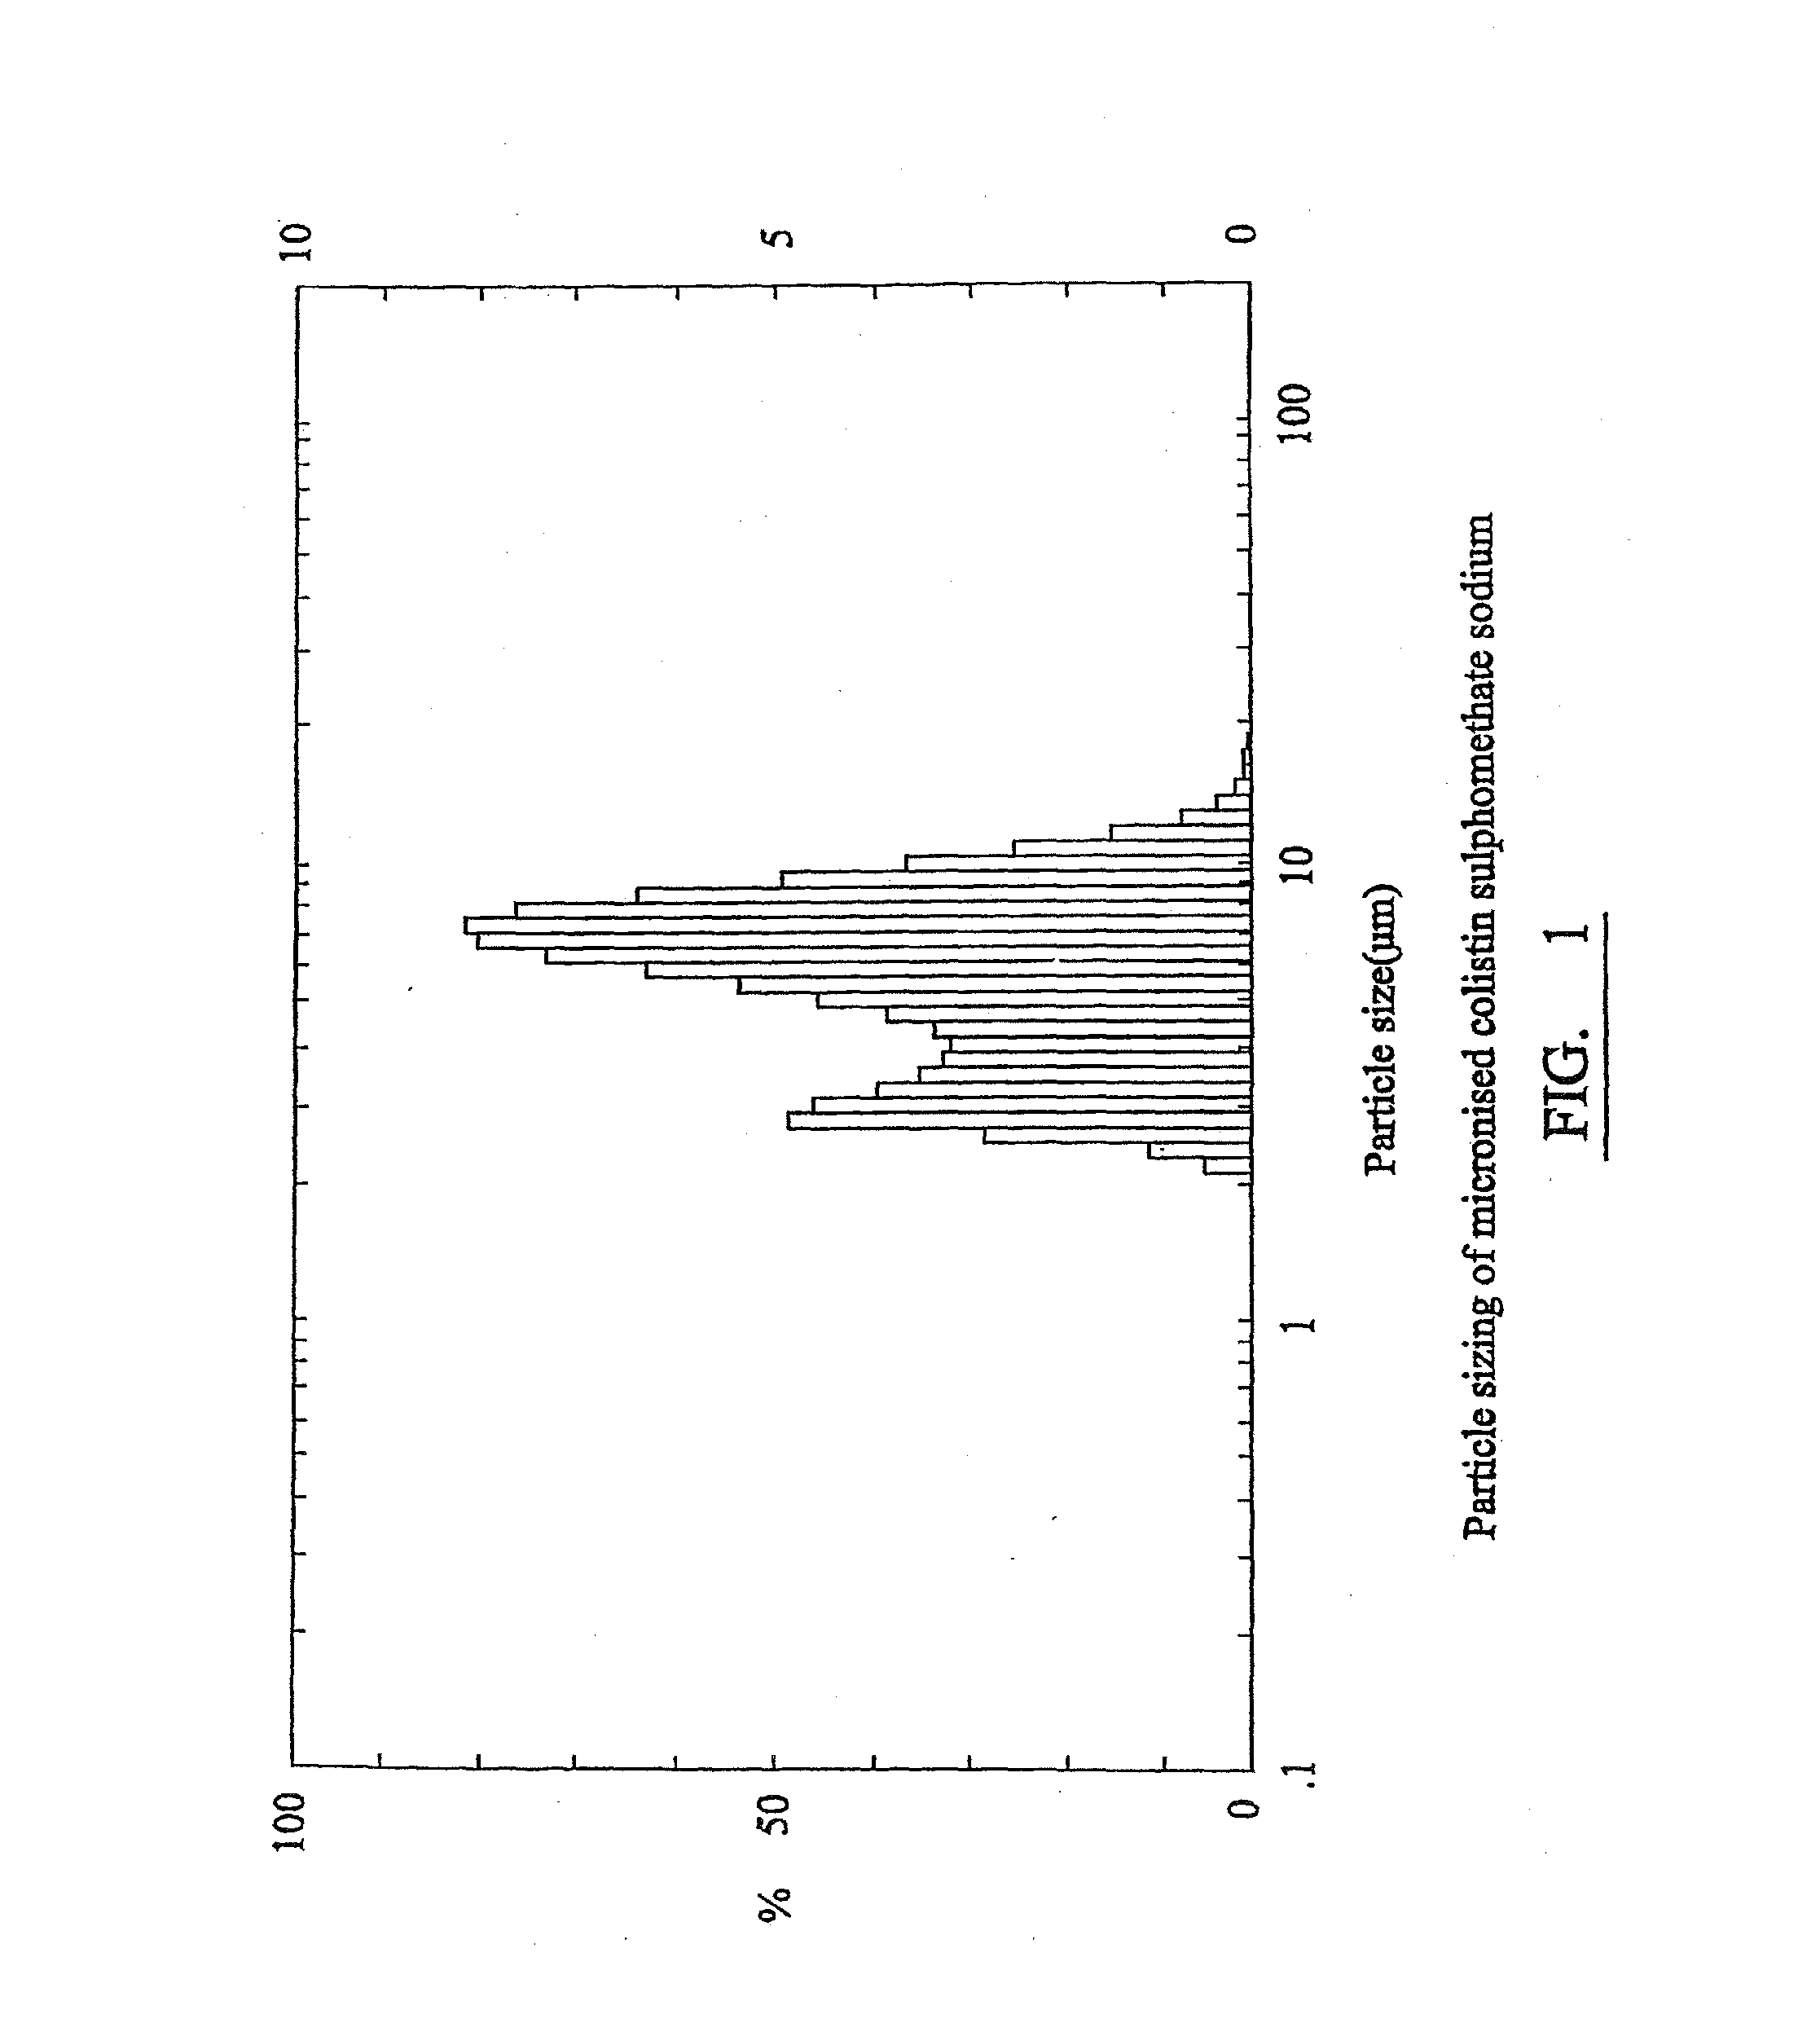 Micronized pharmaceutical compositions